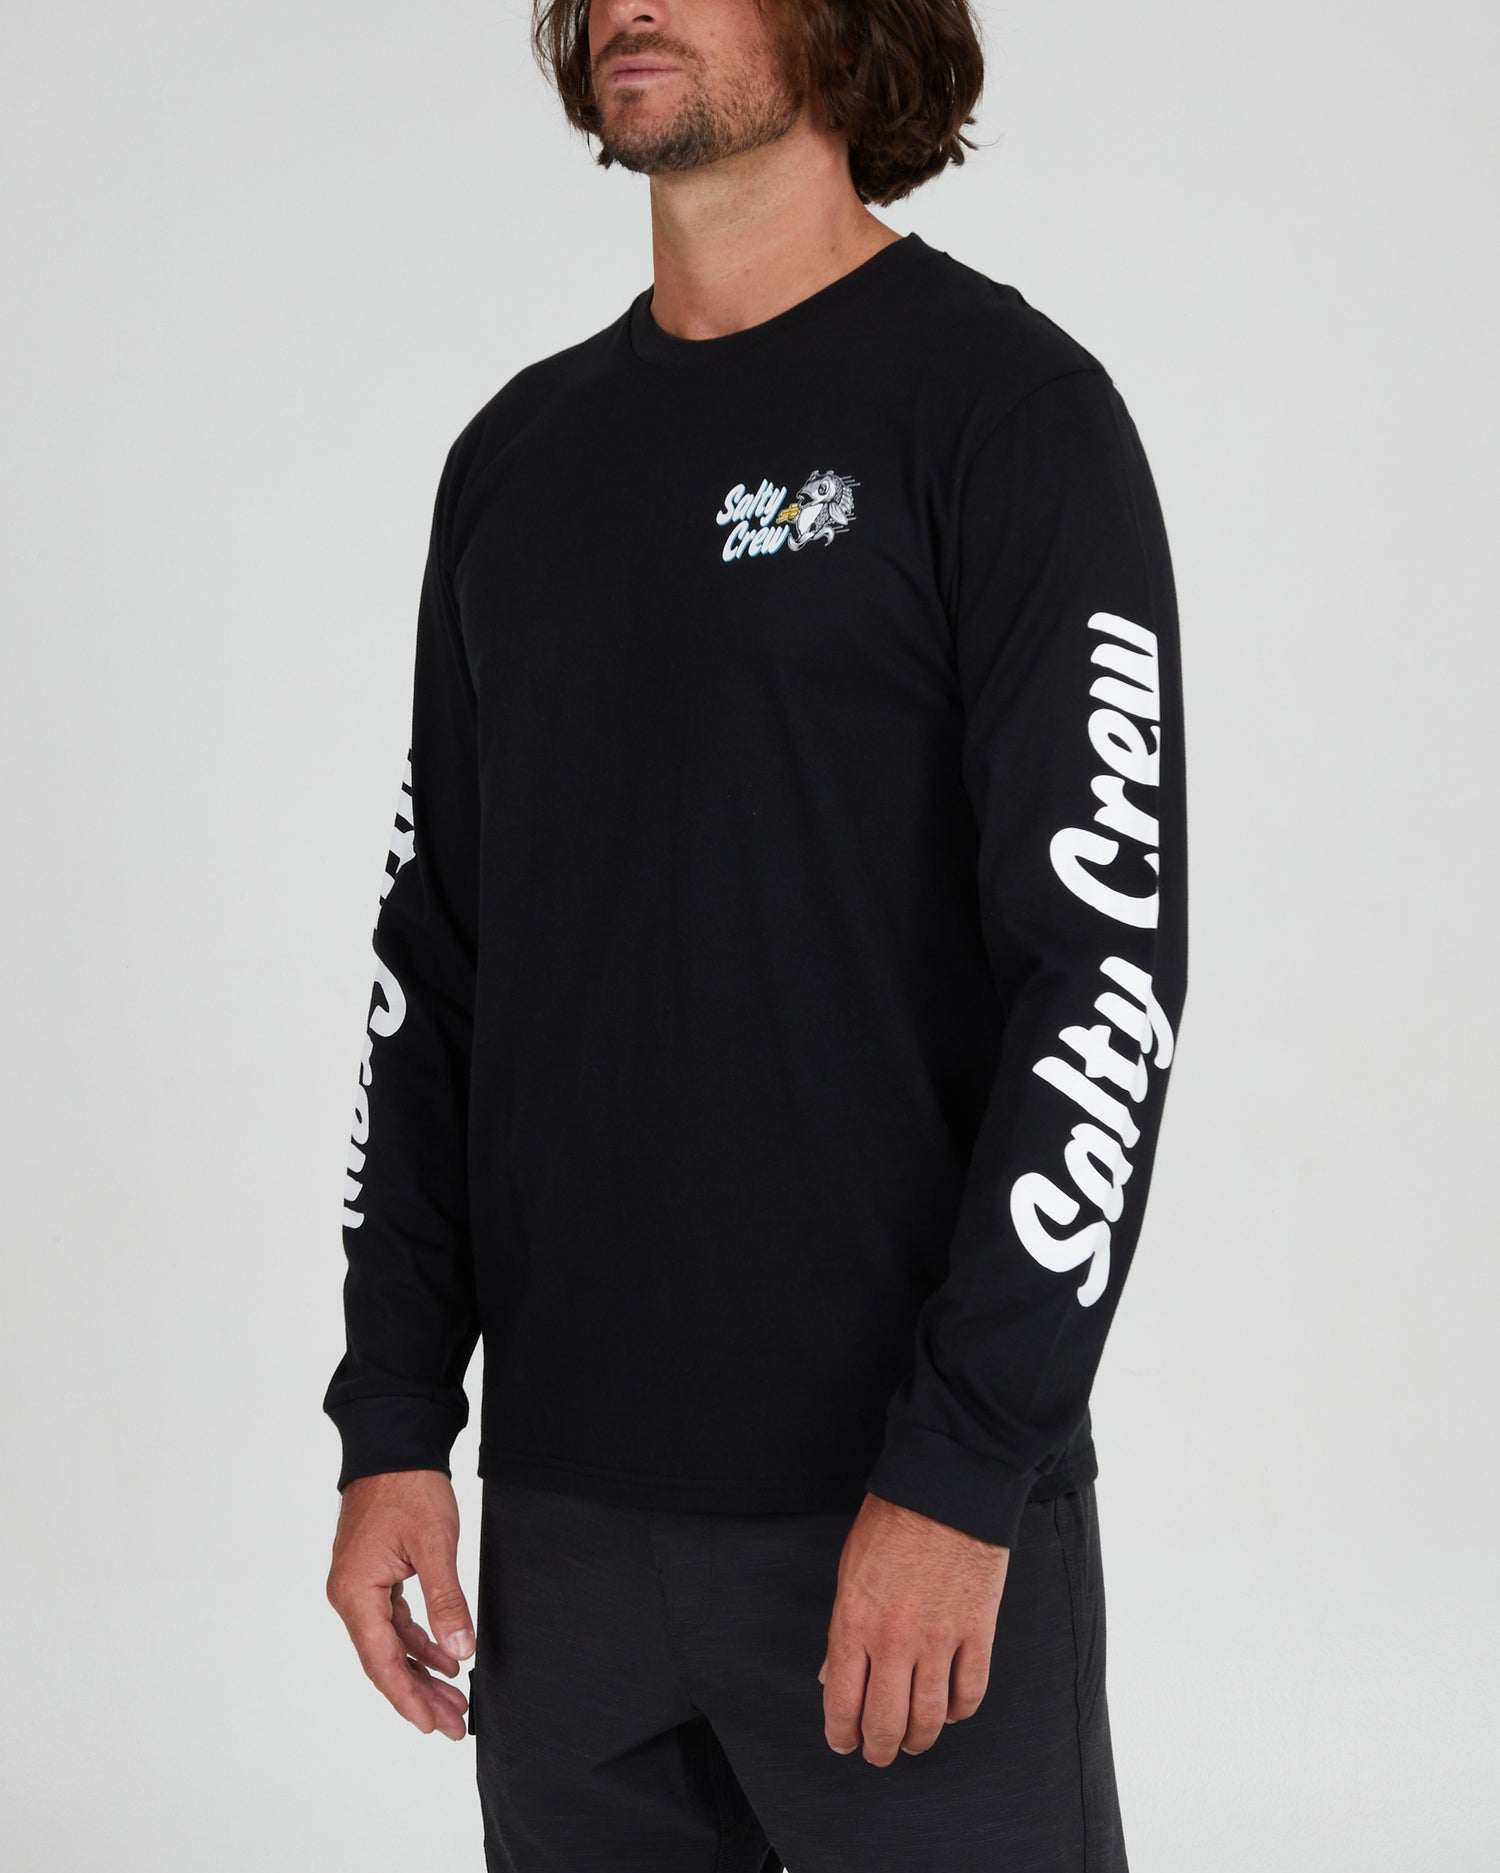 On body front angle of the Fish and Chips Black L/S Premium Tee